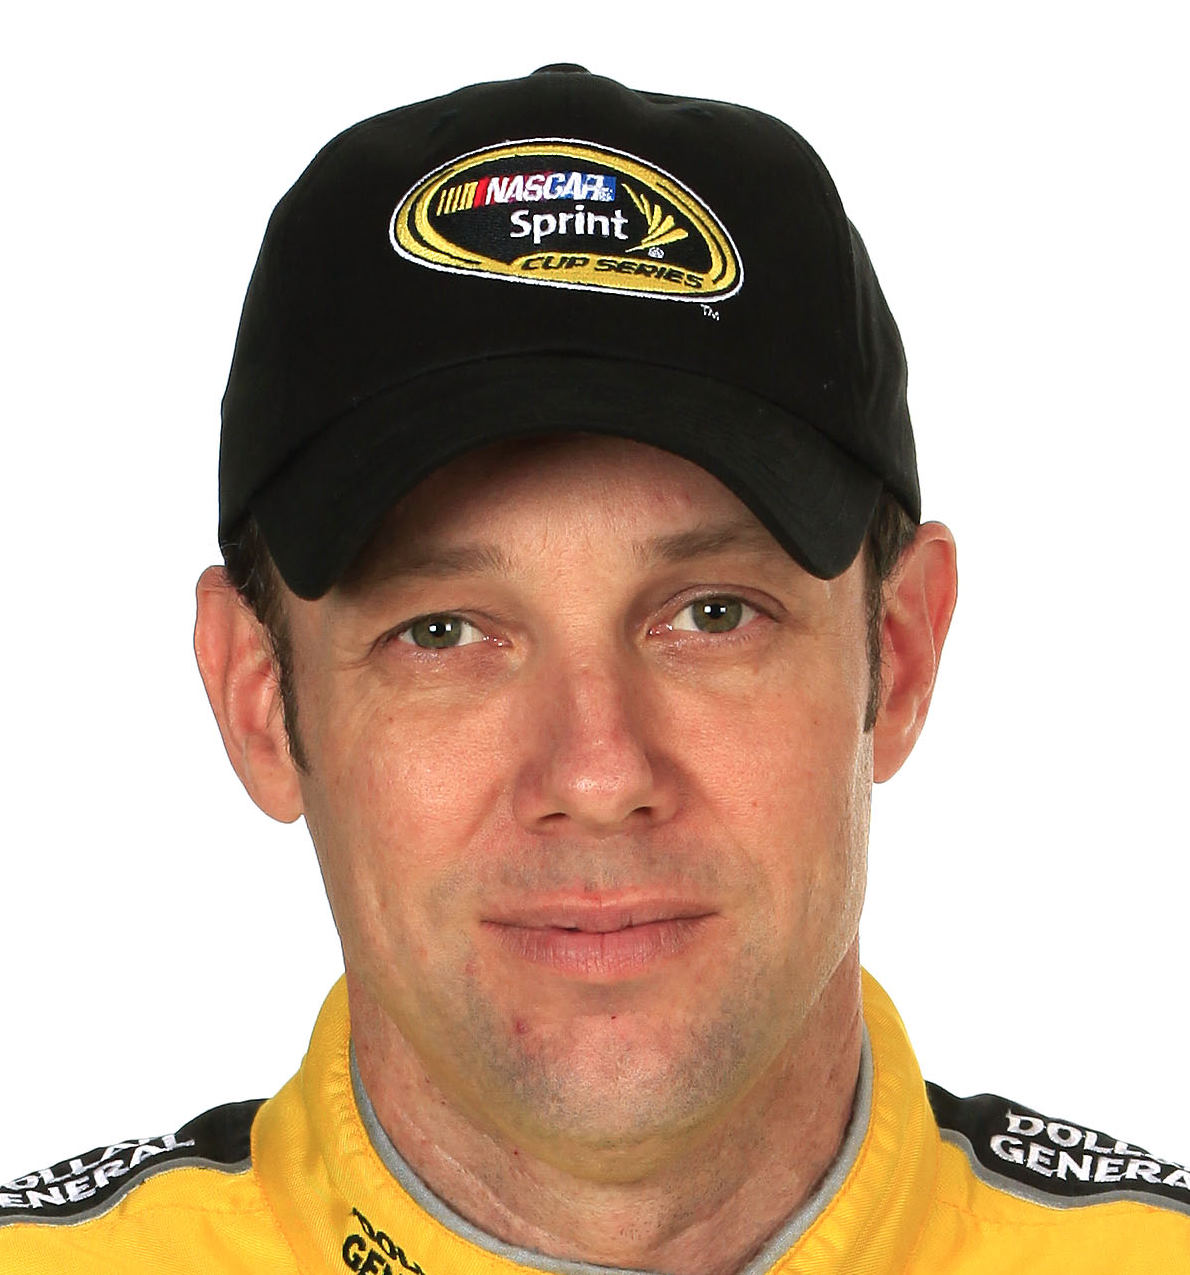 Kenseth will have a new spotter for Daytona